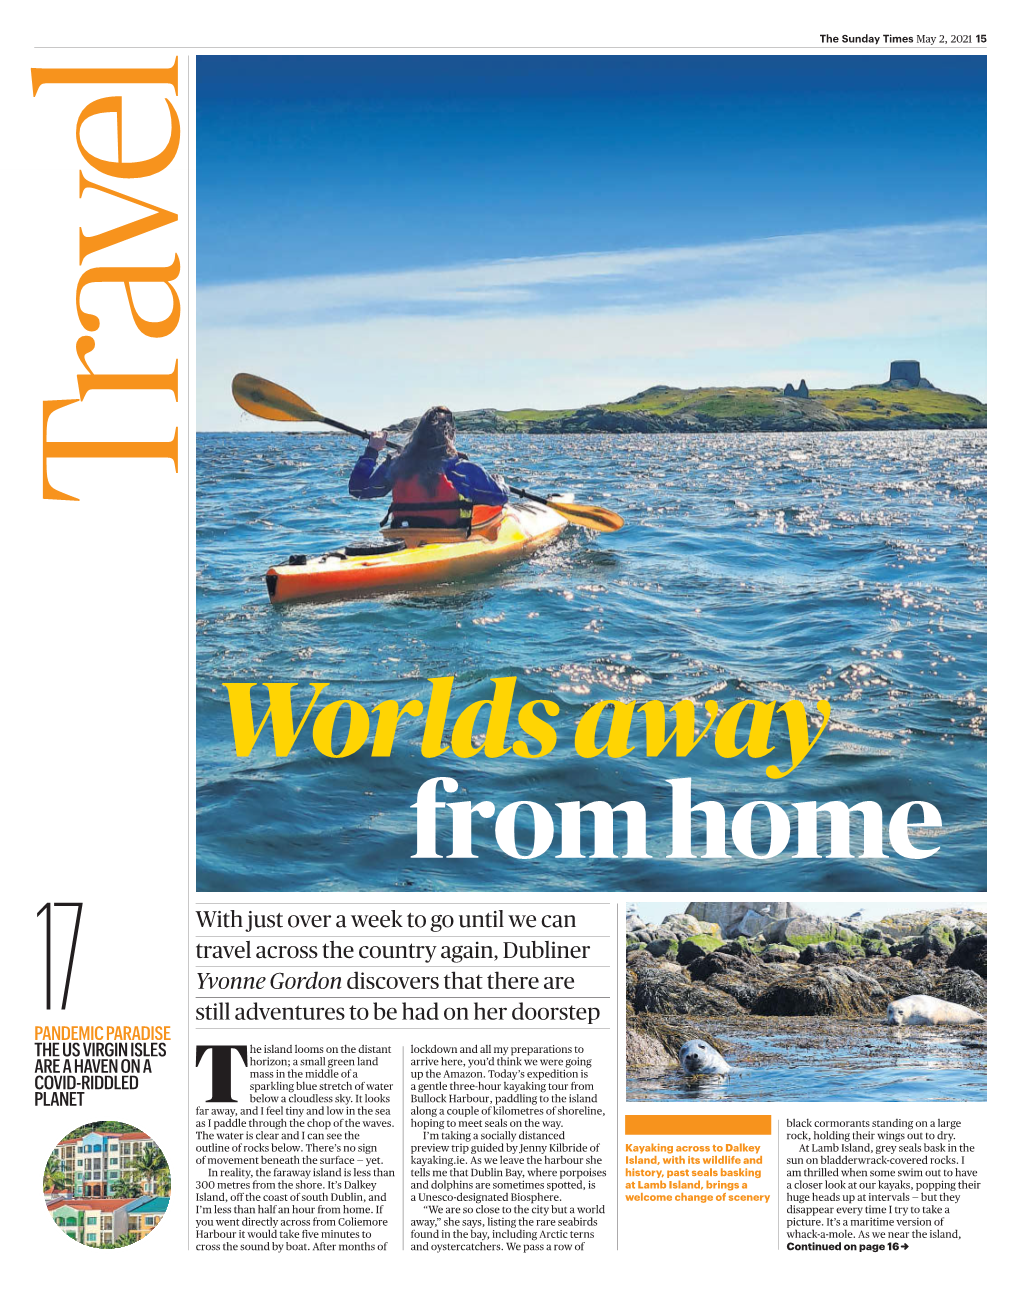 Travel the Sunday Times May 2, 2021 15 Travel